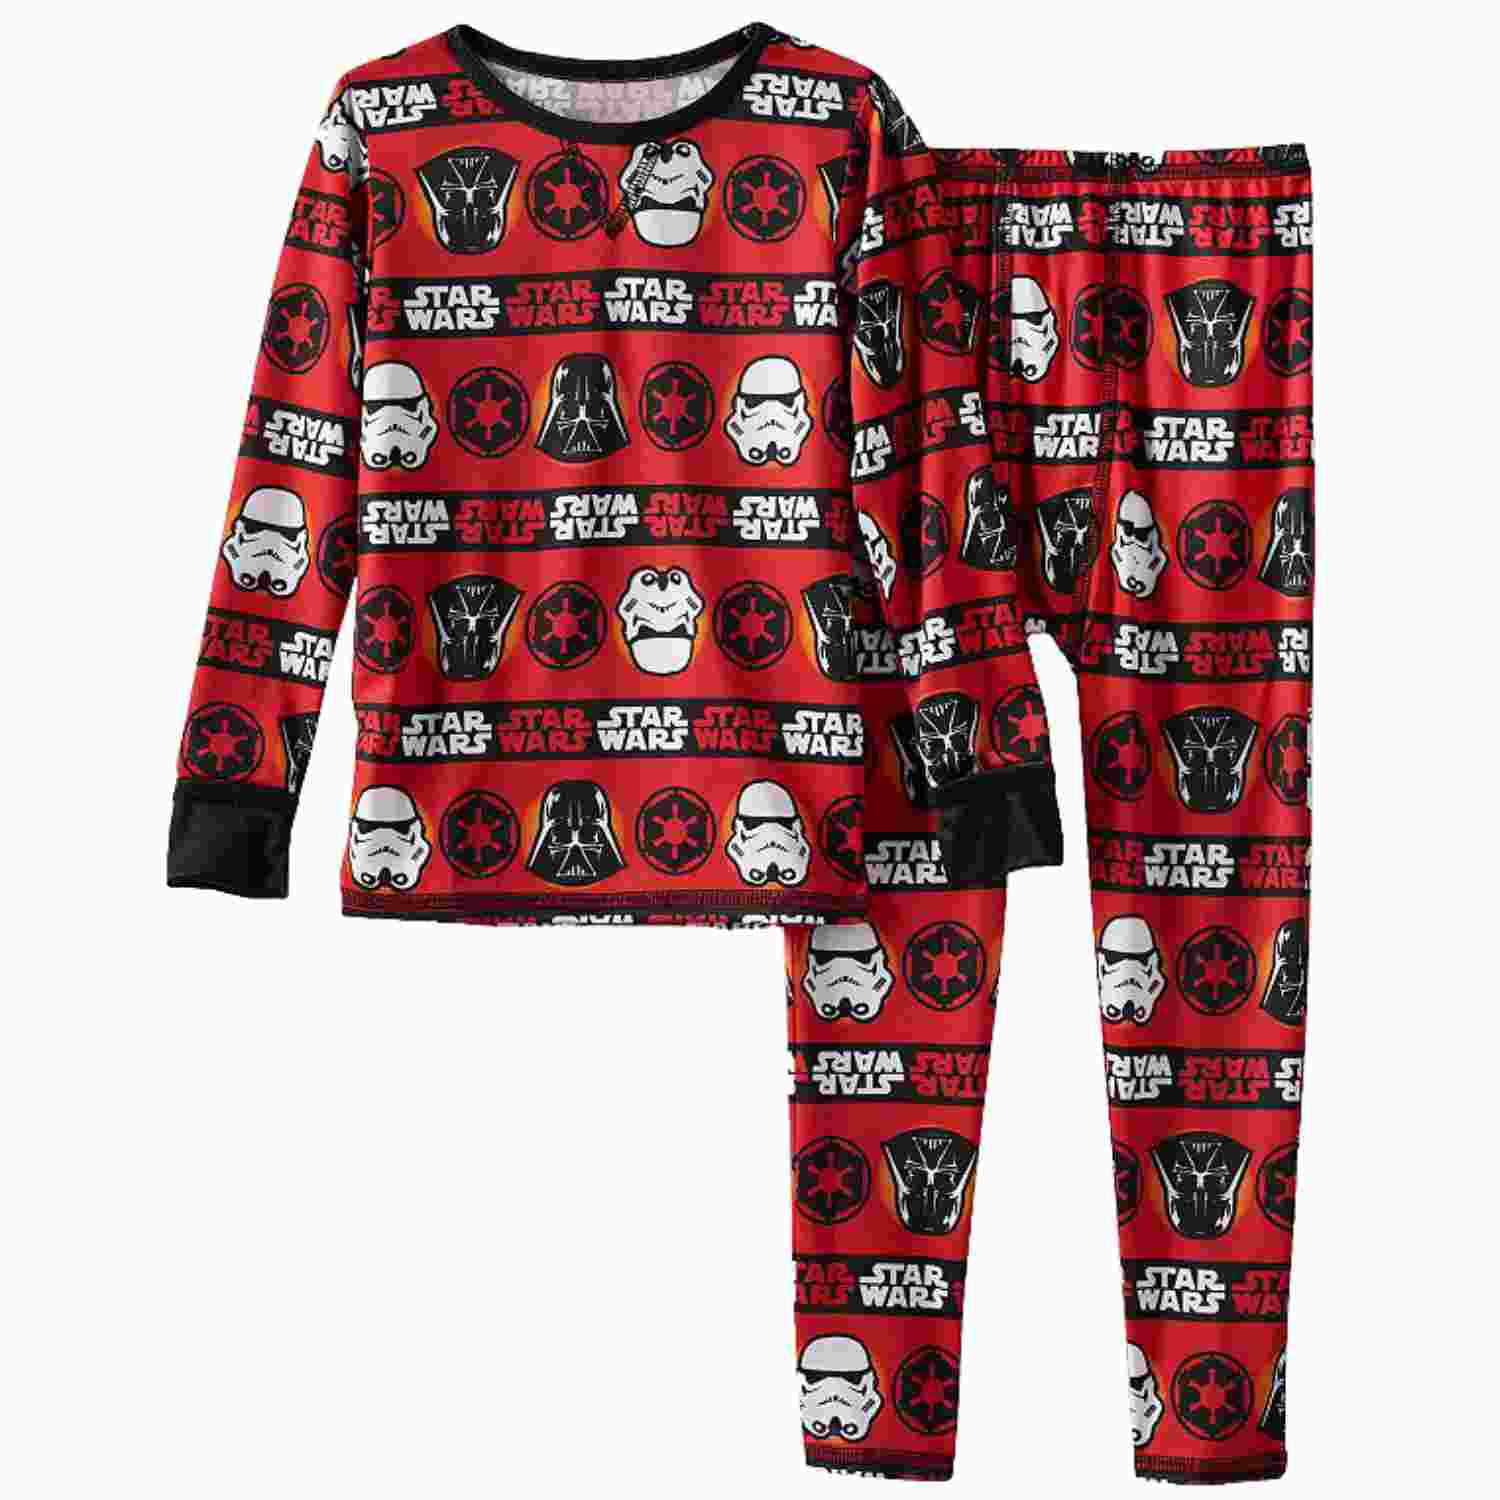 Details about   NWT Cuddl Duds Red STAR WARS 2 Pc Comfortech Poly BASE LAYER Long Johns 2T-3T 